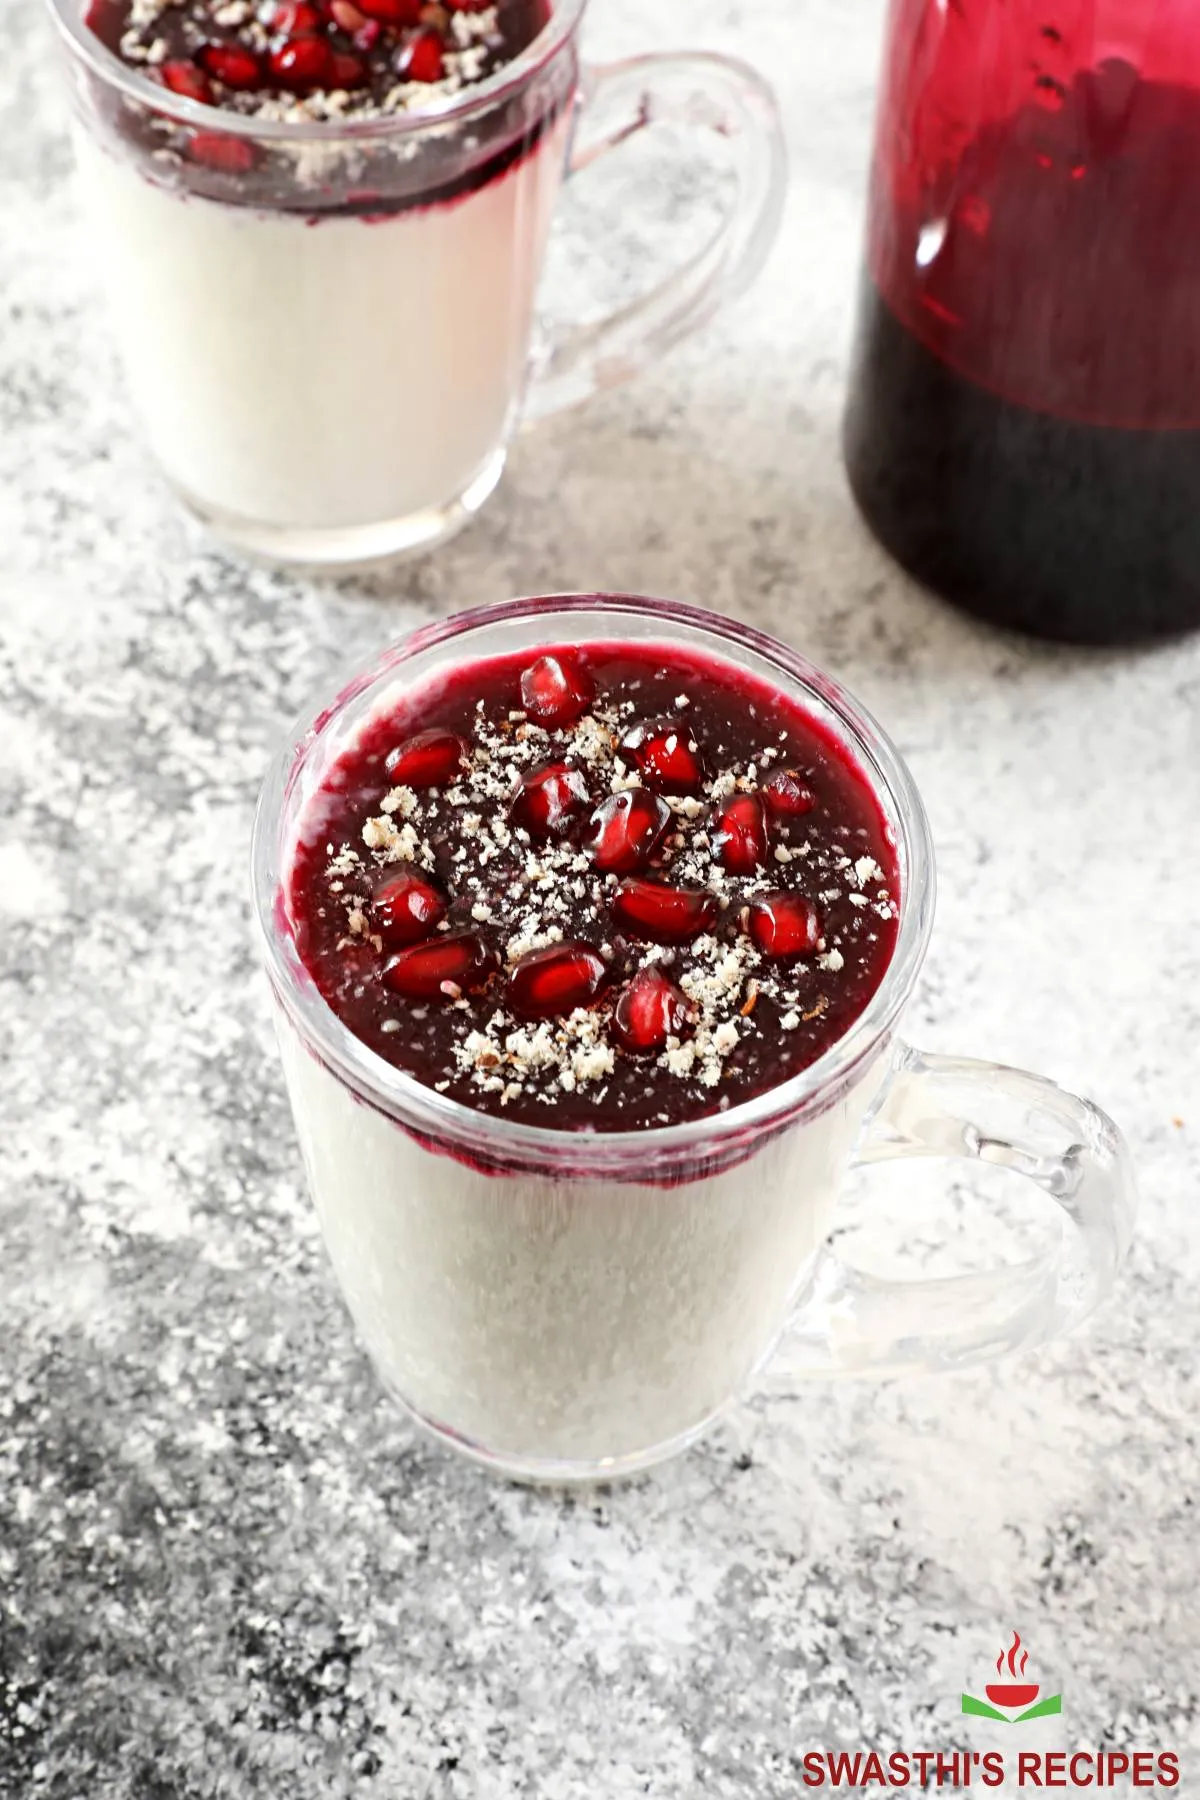 Pomegranate molasses served as a topping over panna cotta